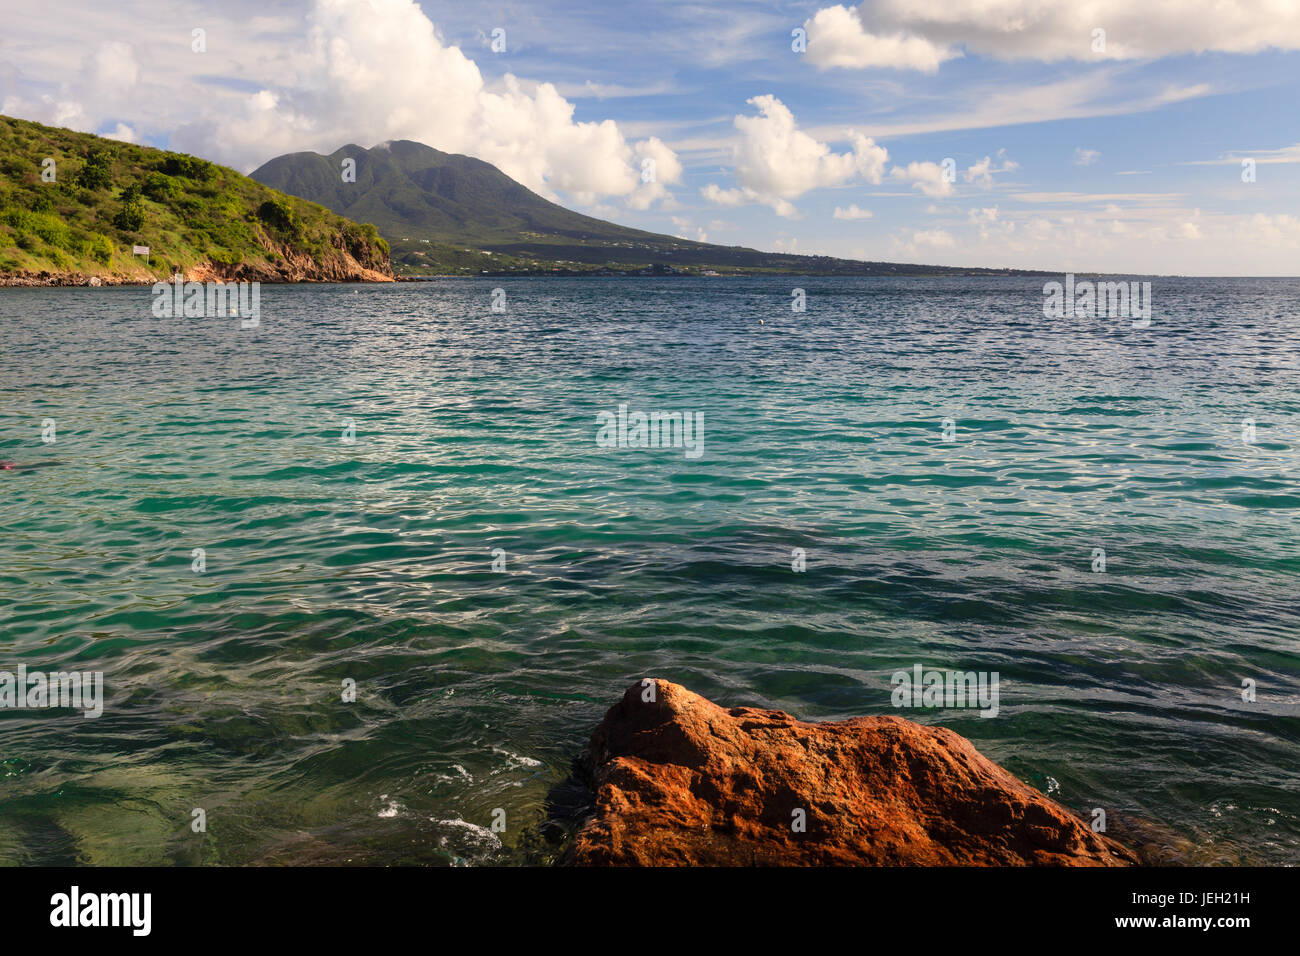 The view from Cockleshell Bay on the Caribbean island of St. Kitts in the West Indies.  The island of Nevis can be seen in the background. Stock Photo